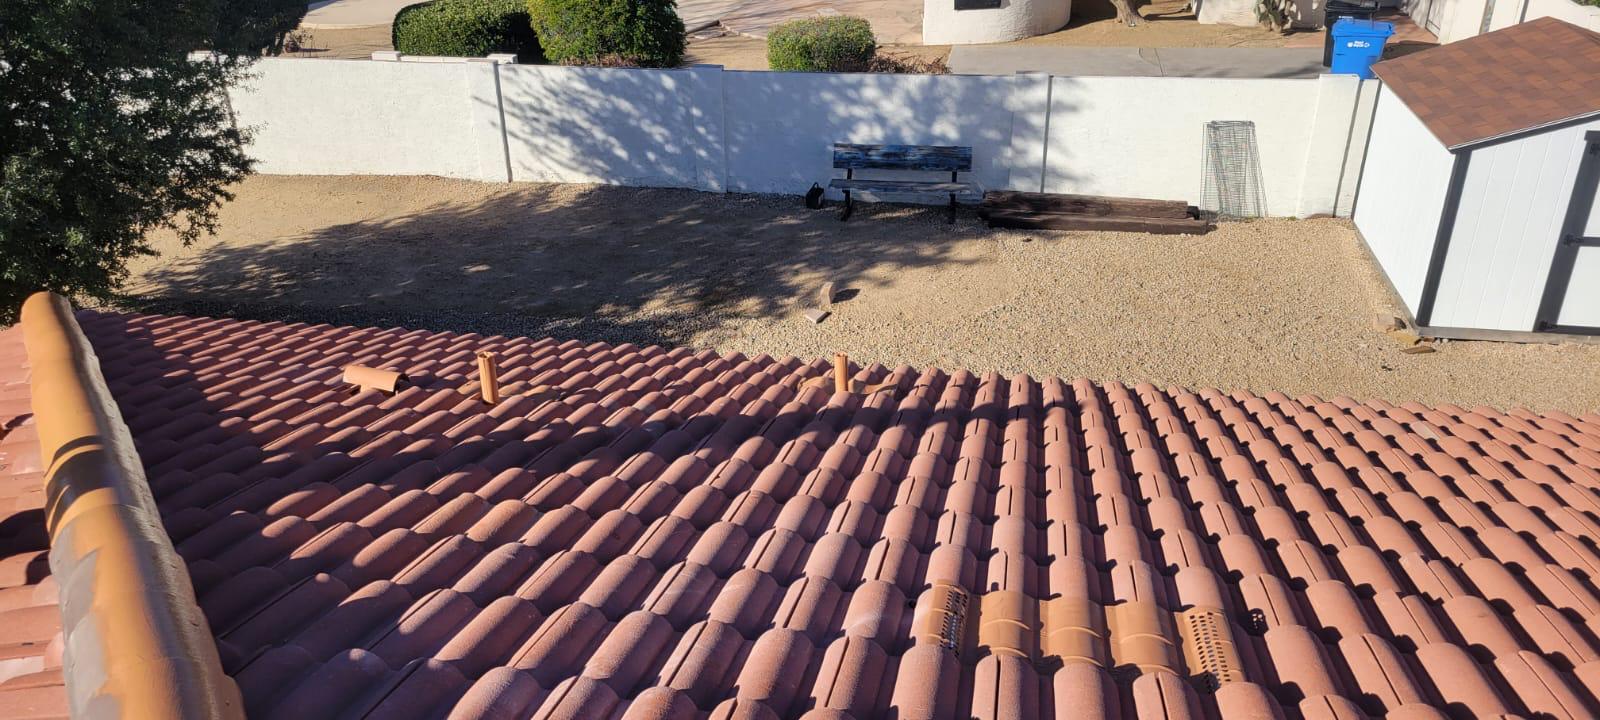 Overhead view of a Gilbert home with freshly repaired tile roofing.